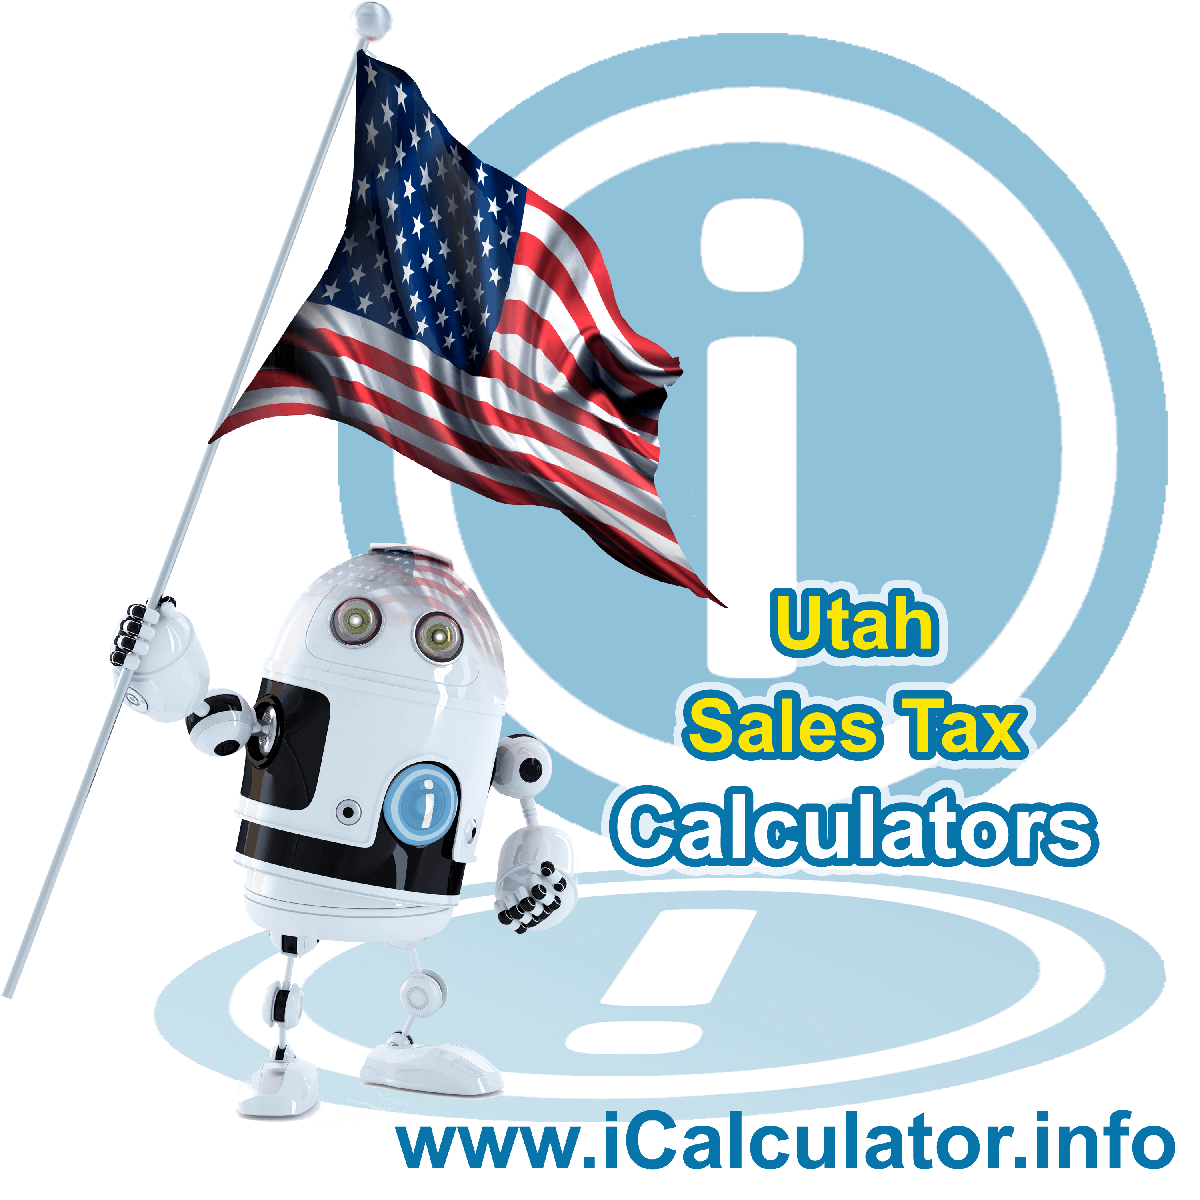 Hatch Sales Rates: This image illustrates a calculator robot calculating Hatch sales tax manually using the Hatch Sales Tax Formula. You can use this information to calculate Hatch Sales Tax manually or use the Hatch Sales Tax Calculator to calculate sales tax online.